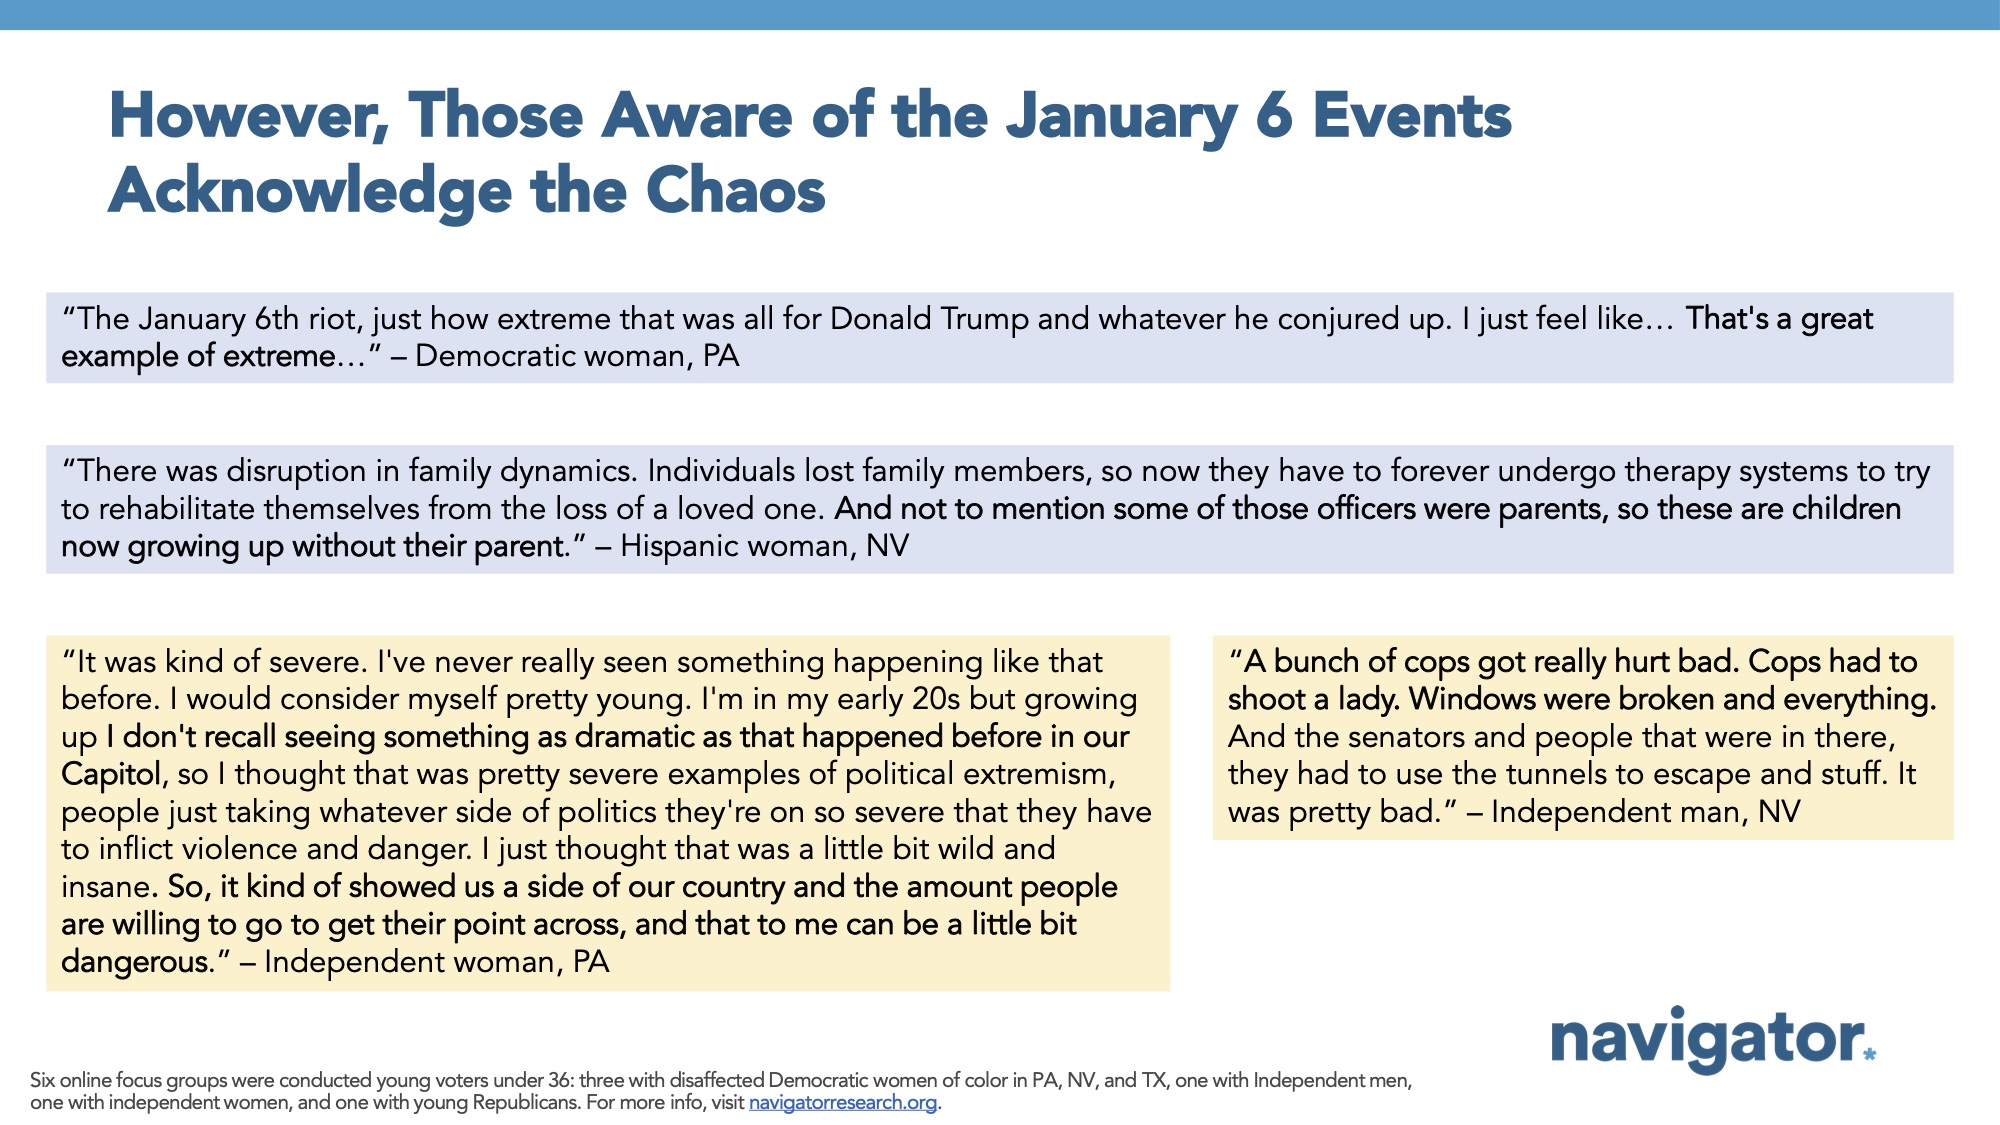 Focus group report slide titled: However, Those Aware of the January 6 Events Acknowledge the Chaos